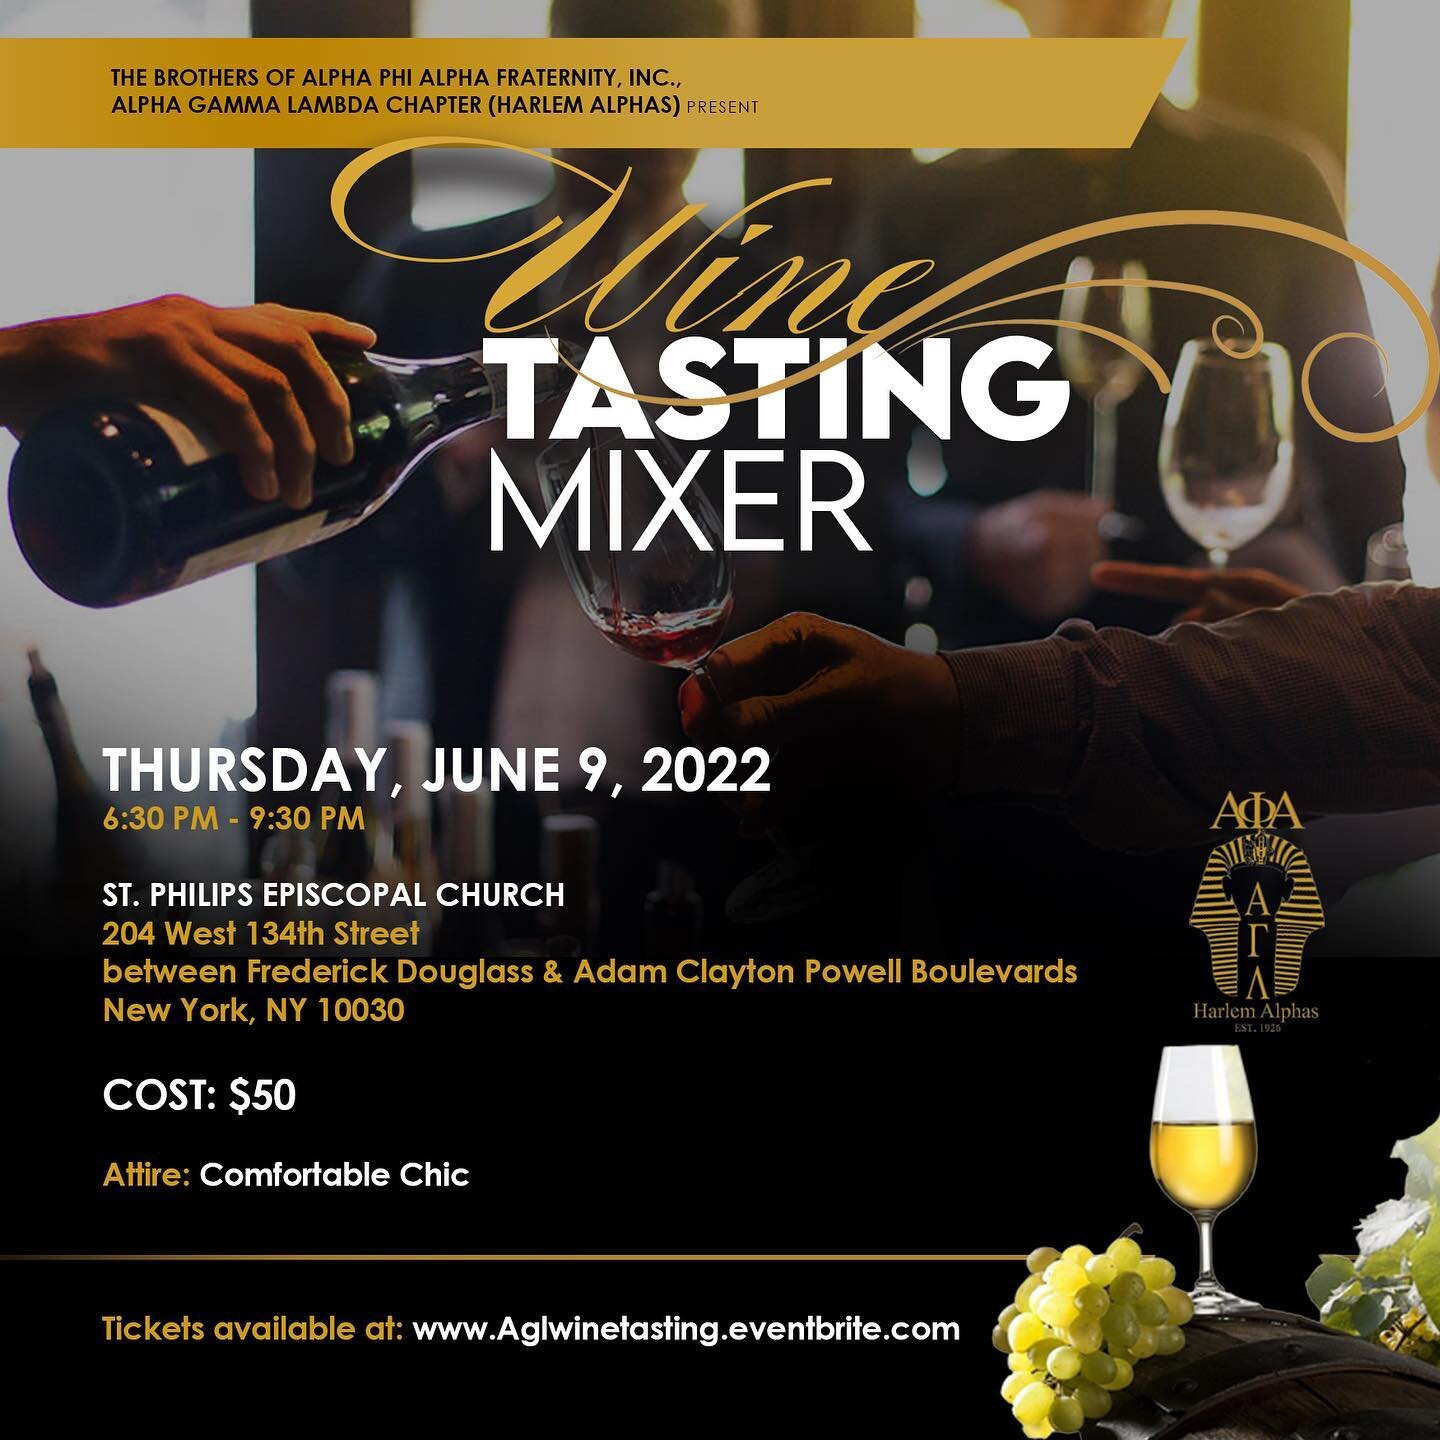 T A S T E of S U M M E R // join us on Thursday, June 9 starting at 6:30pm for a Wine Tasting Mixer at the Garden @ St. Philips Episcopal Church, 204 West 134th Street between Frederick Douglass &amp; Adam Clayton Powell. 

Tickets available at aglwi